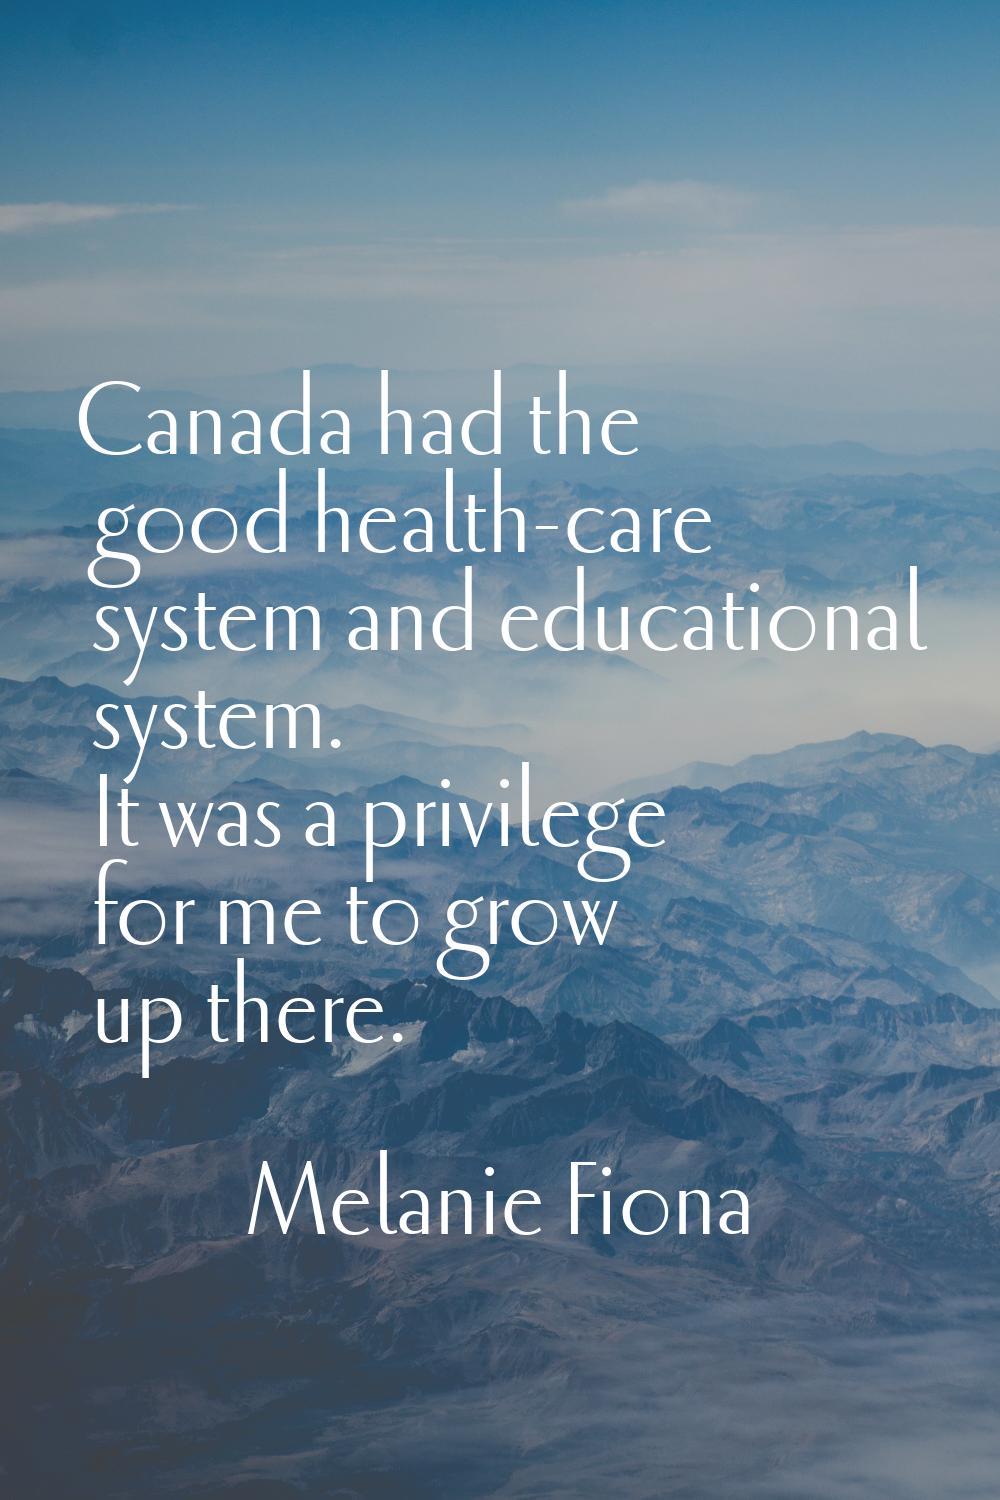 Canada had the good health-care system and educational system. It was a privilege for me to grow up